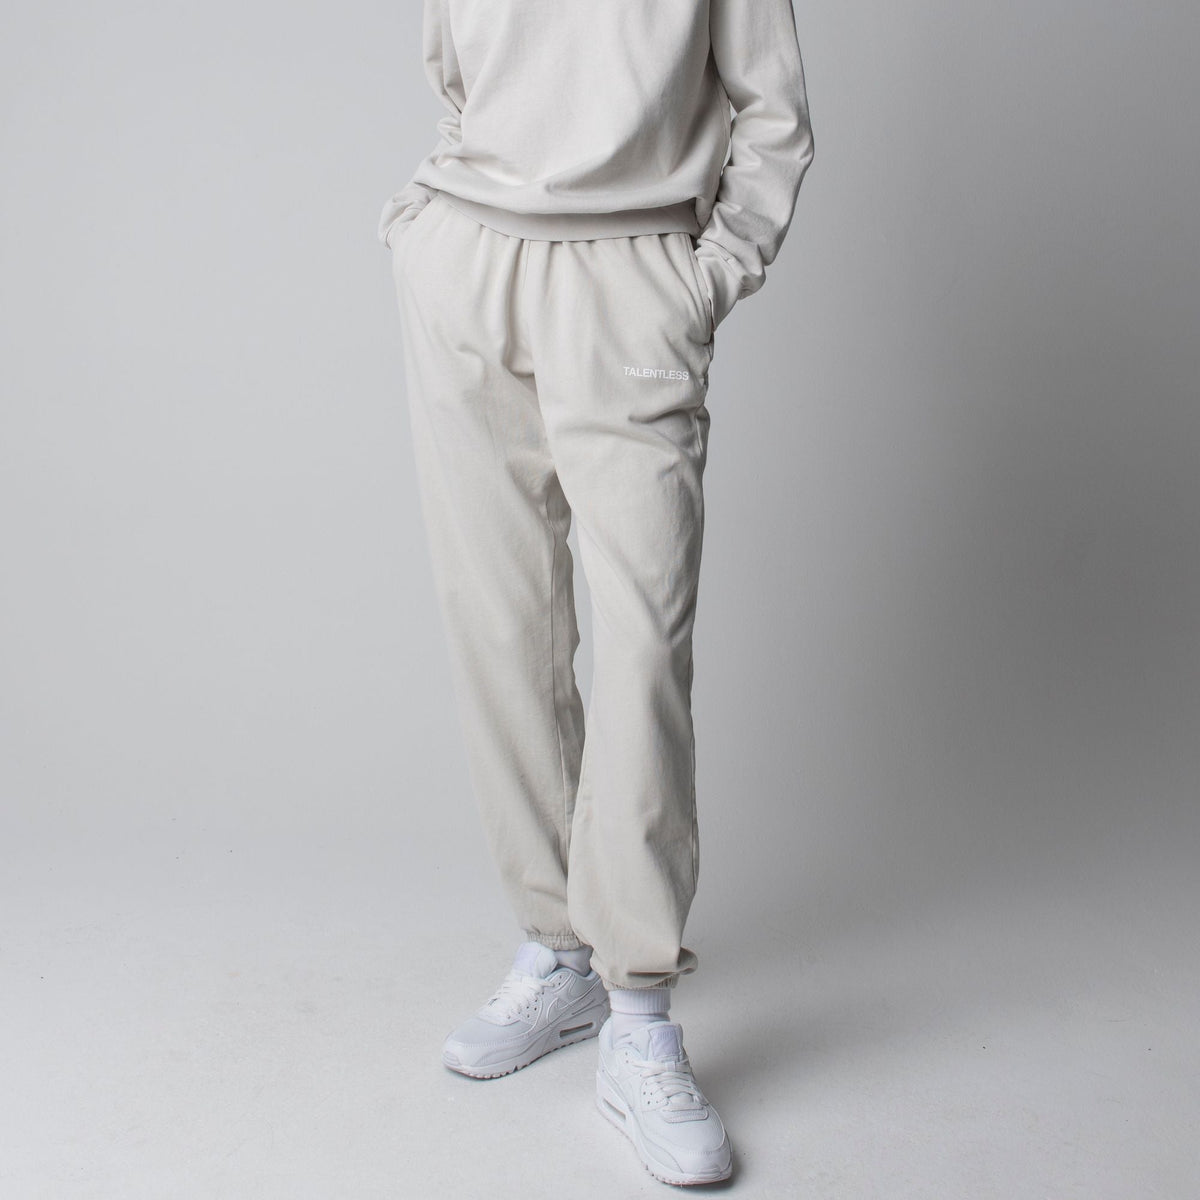 Spring Sale: All Items (Preview) Oversized Grey Joggers